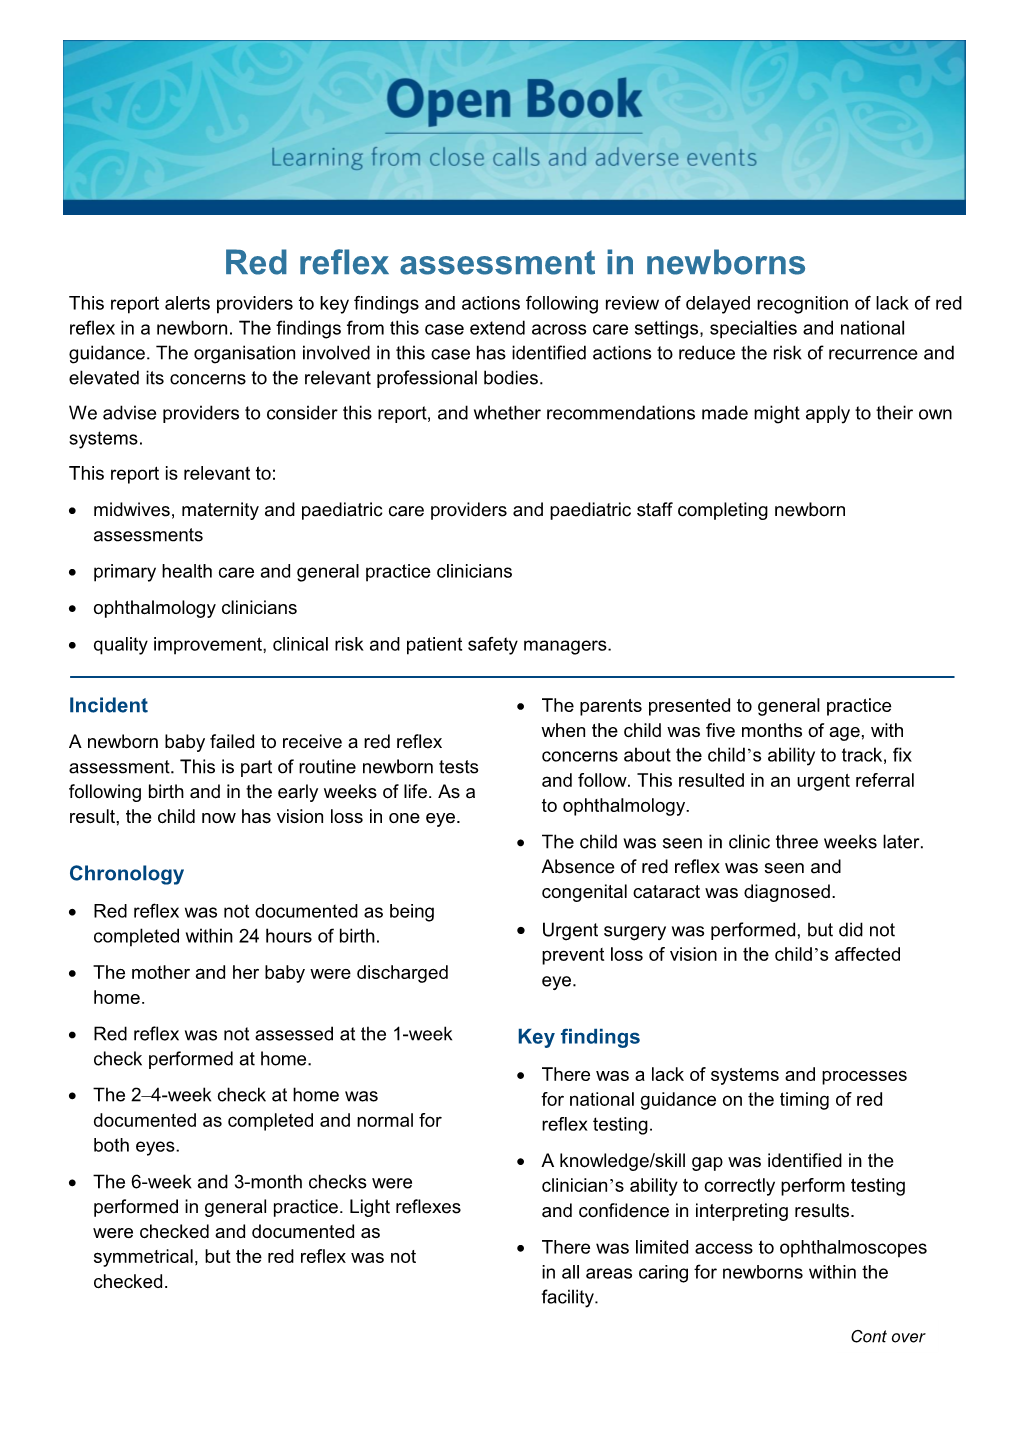 Red Reflex Assessment in Newborns This Report Alerts Providers to Key Findings and Actions Following Review of Delayed Recognition of Lack of Red Reflex in a Newborn